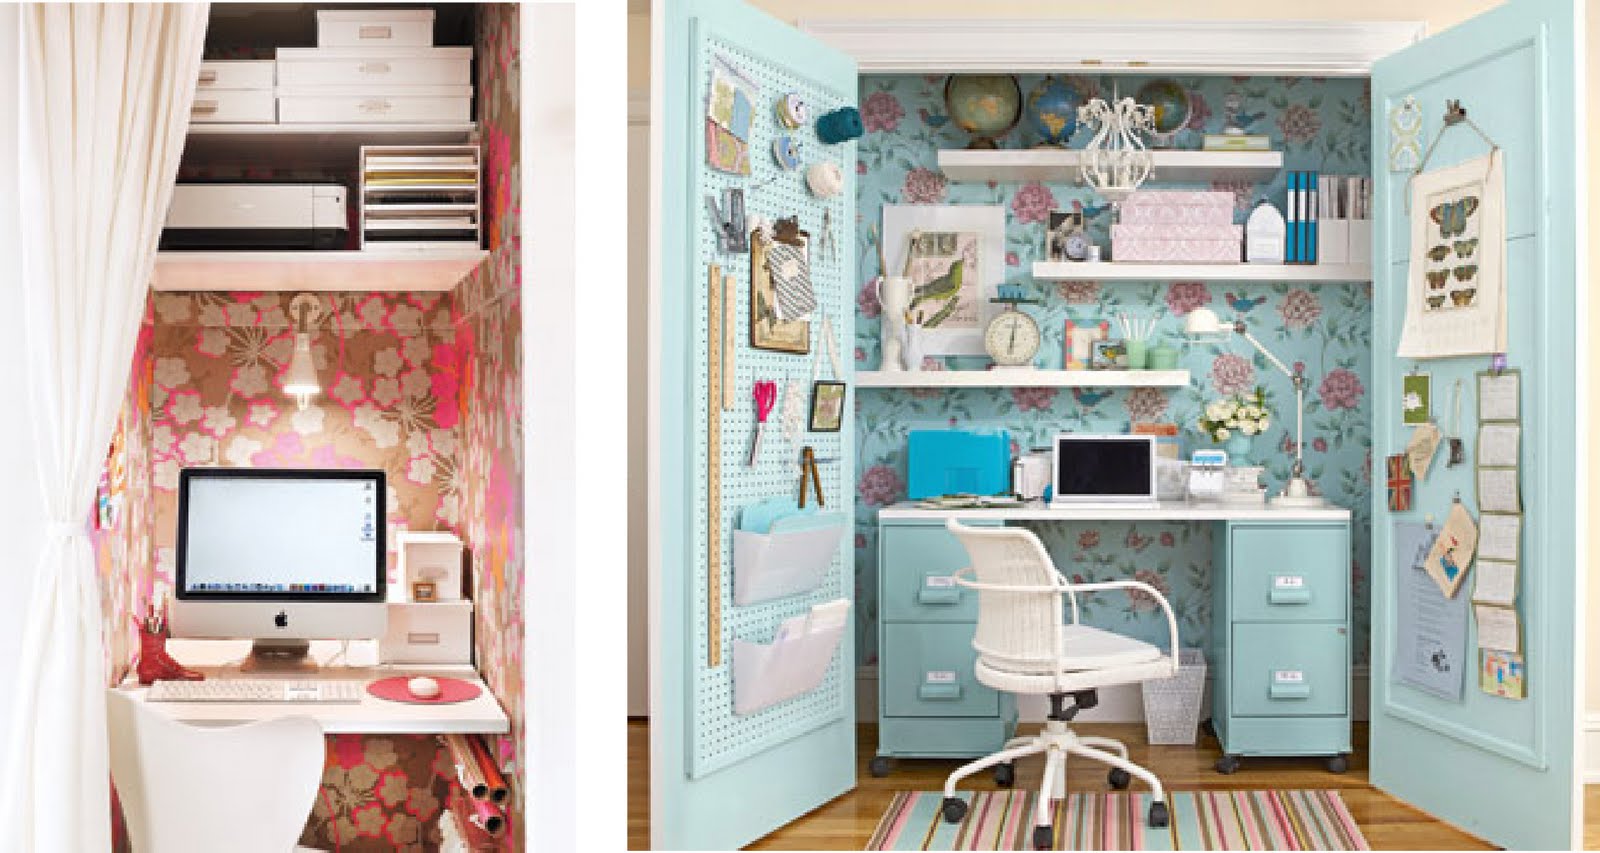 7. Play with colors and wallpaper for a beautiful design